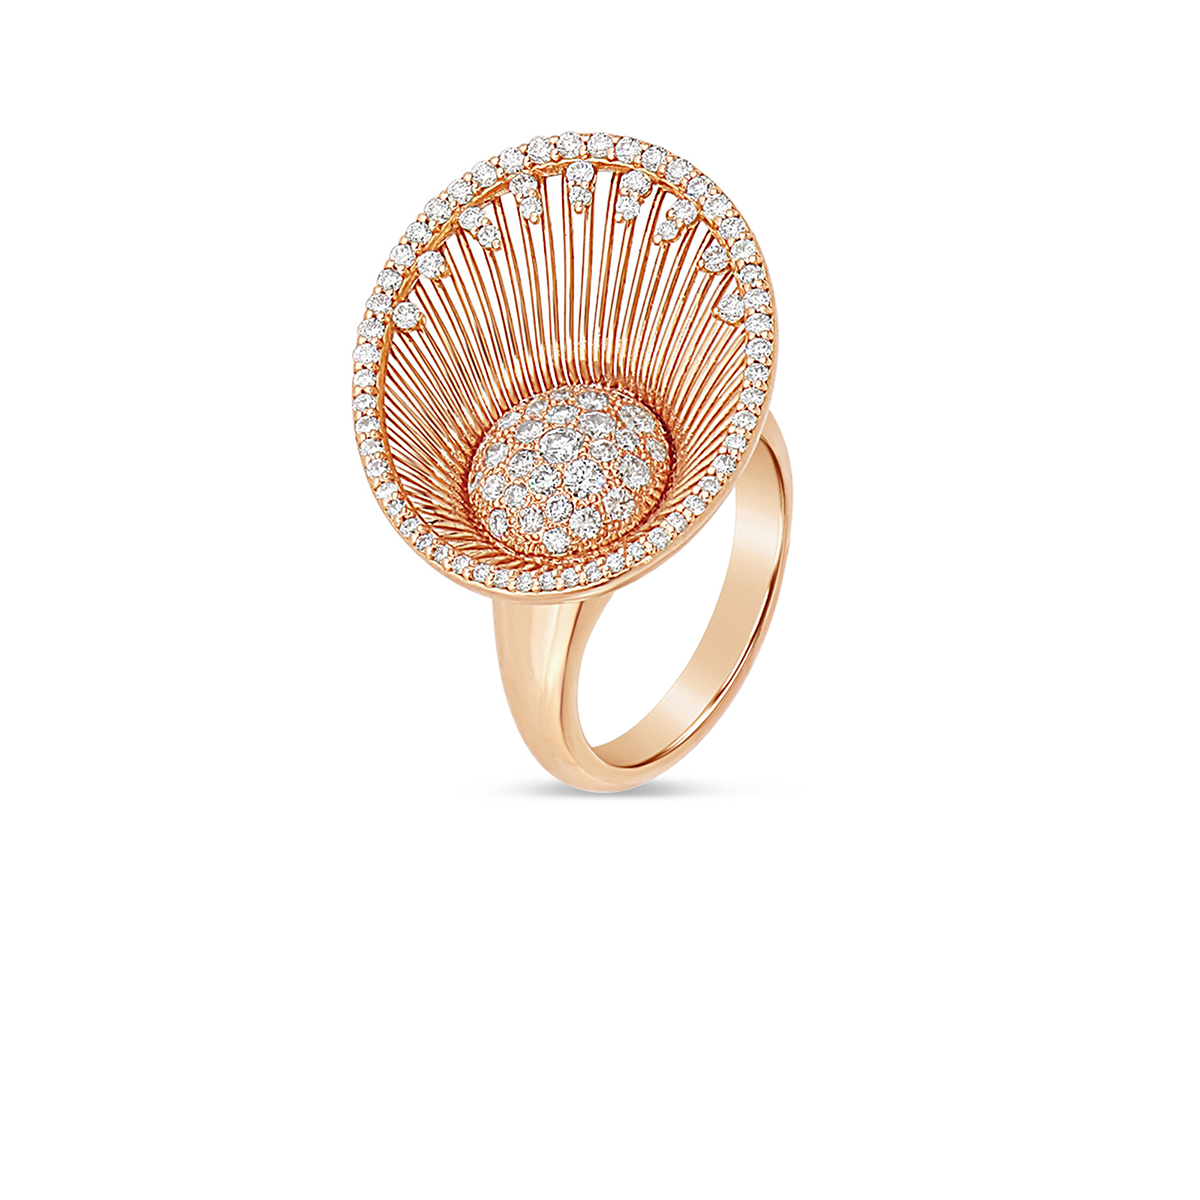 Ellipse Ring in 18kt rose gold and white diamonds